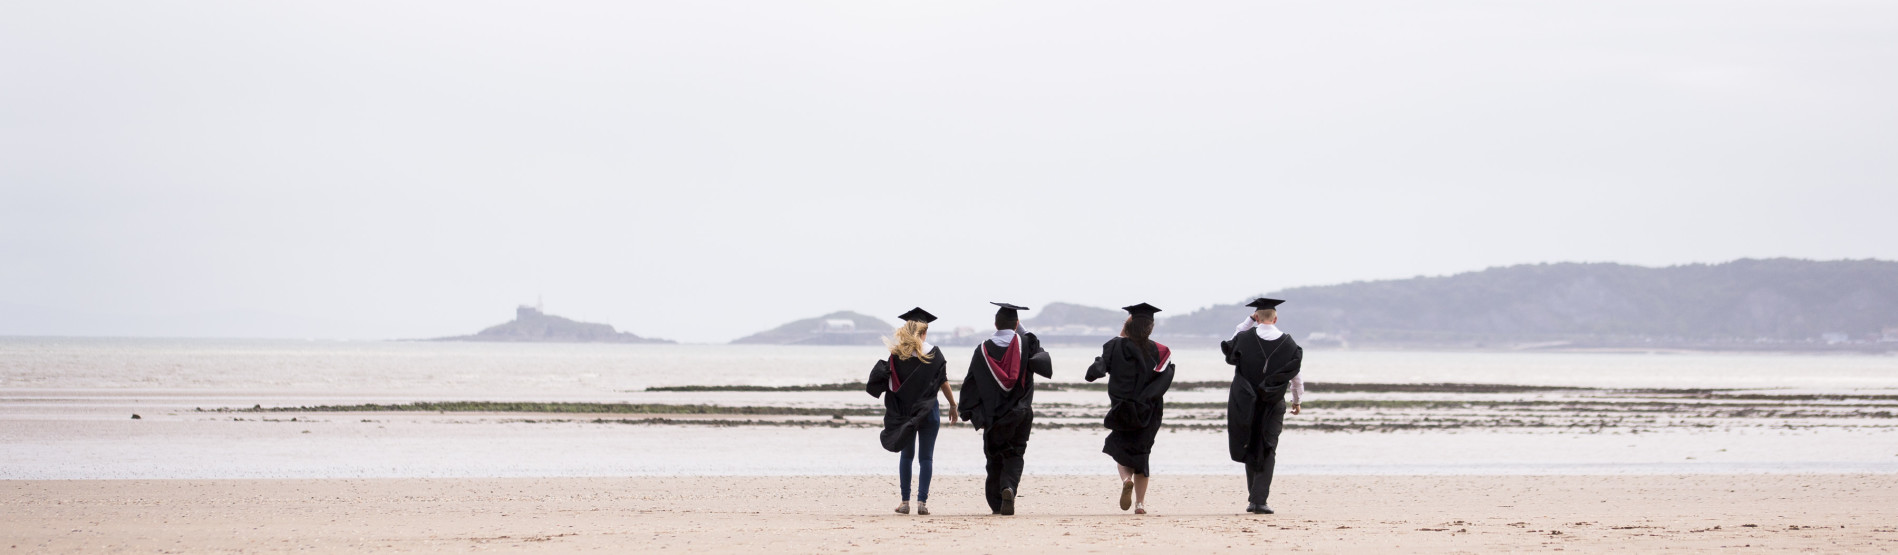 Recent graduates in robes walking away on the beach 